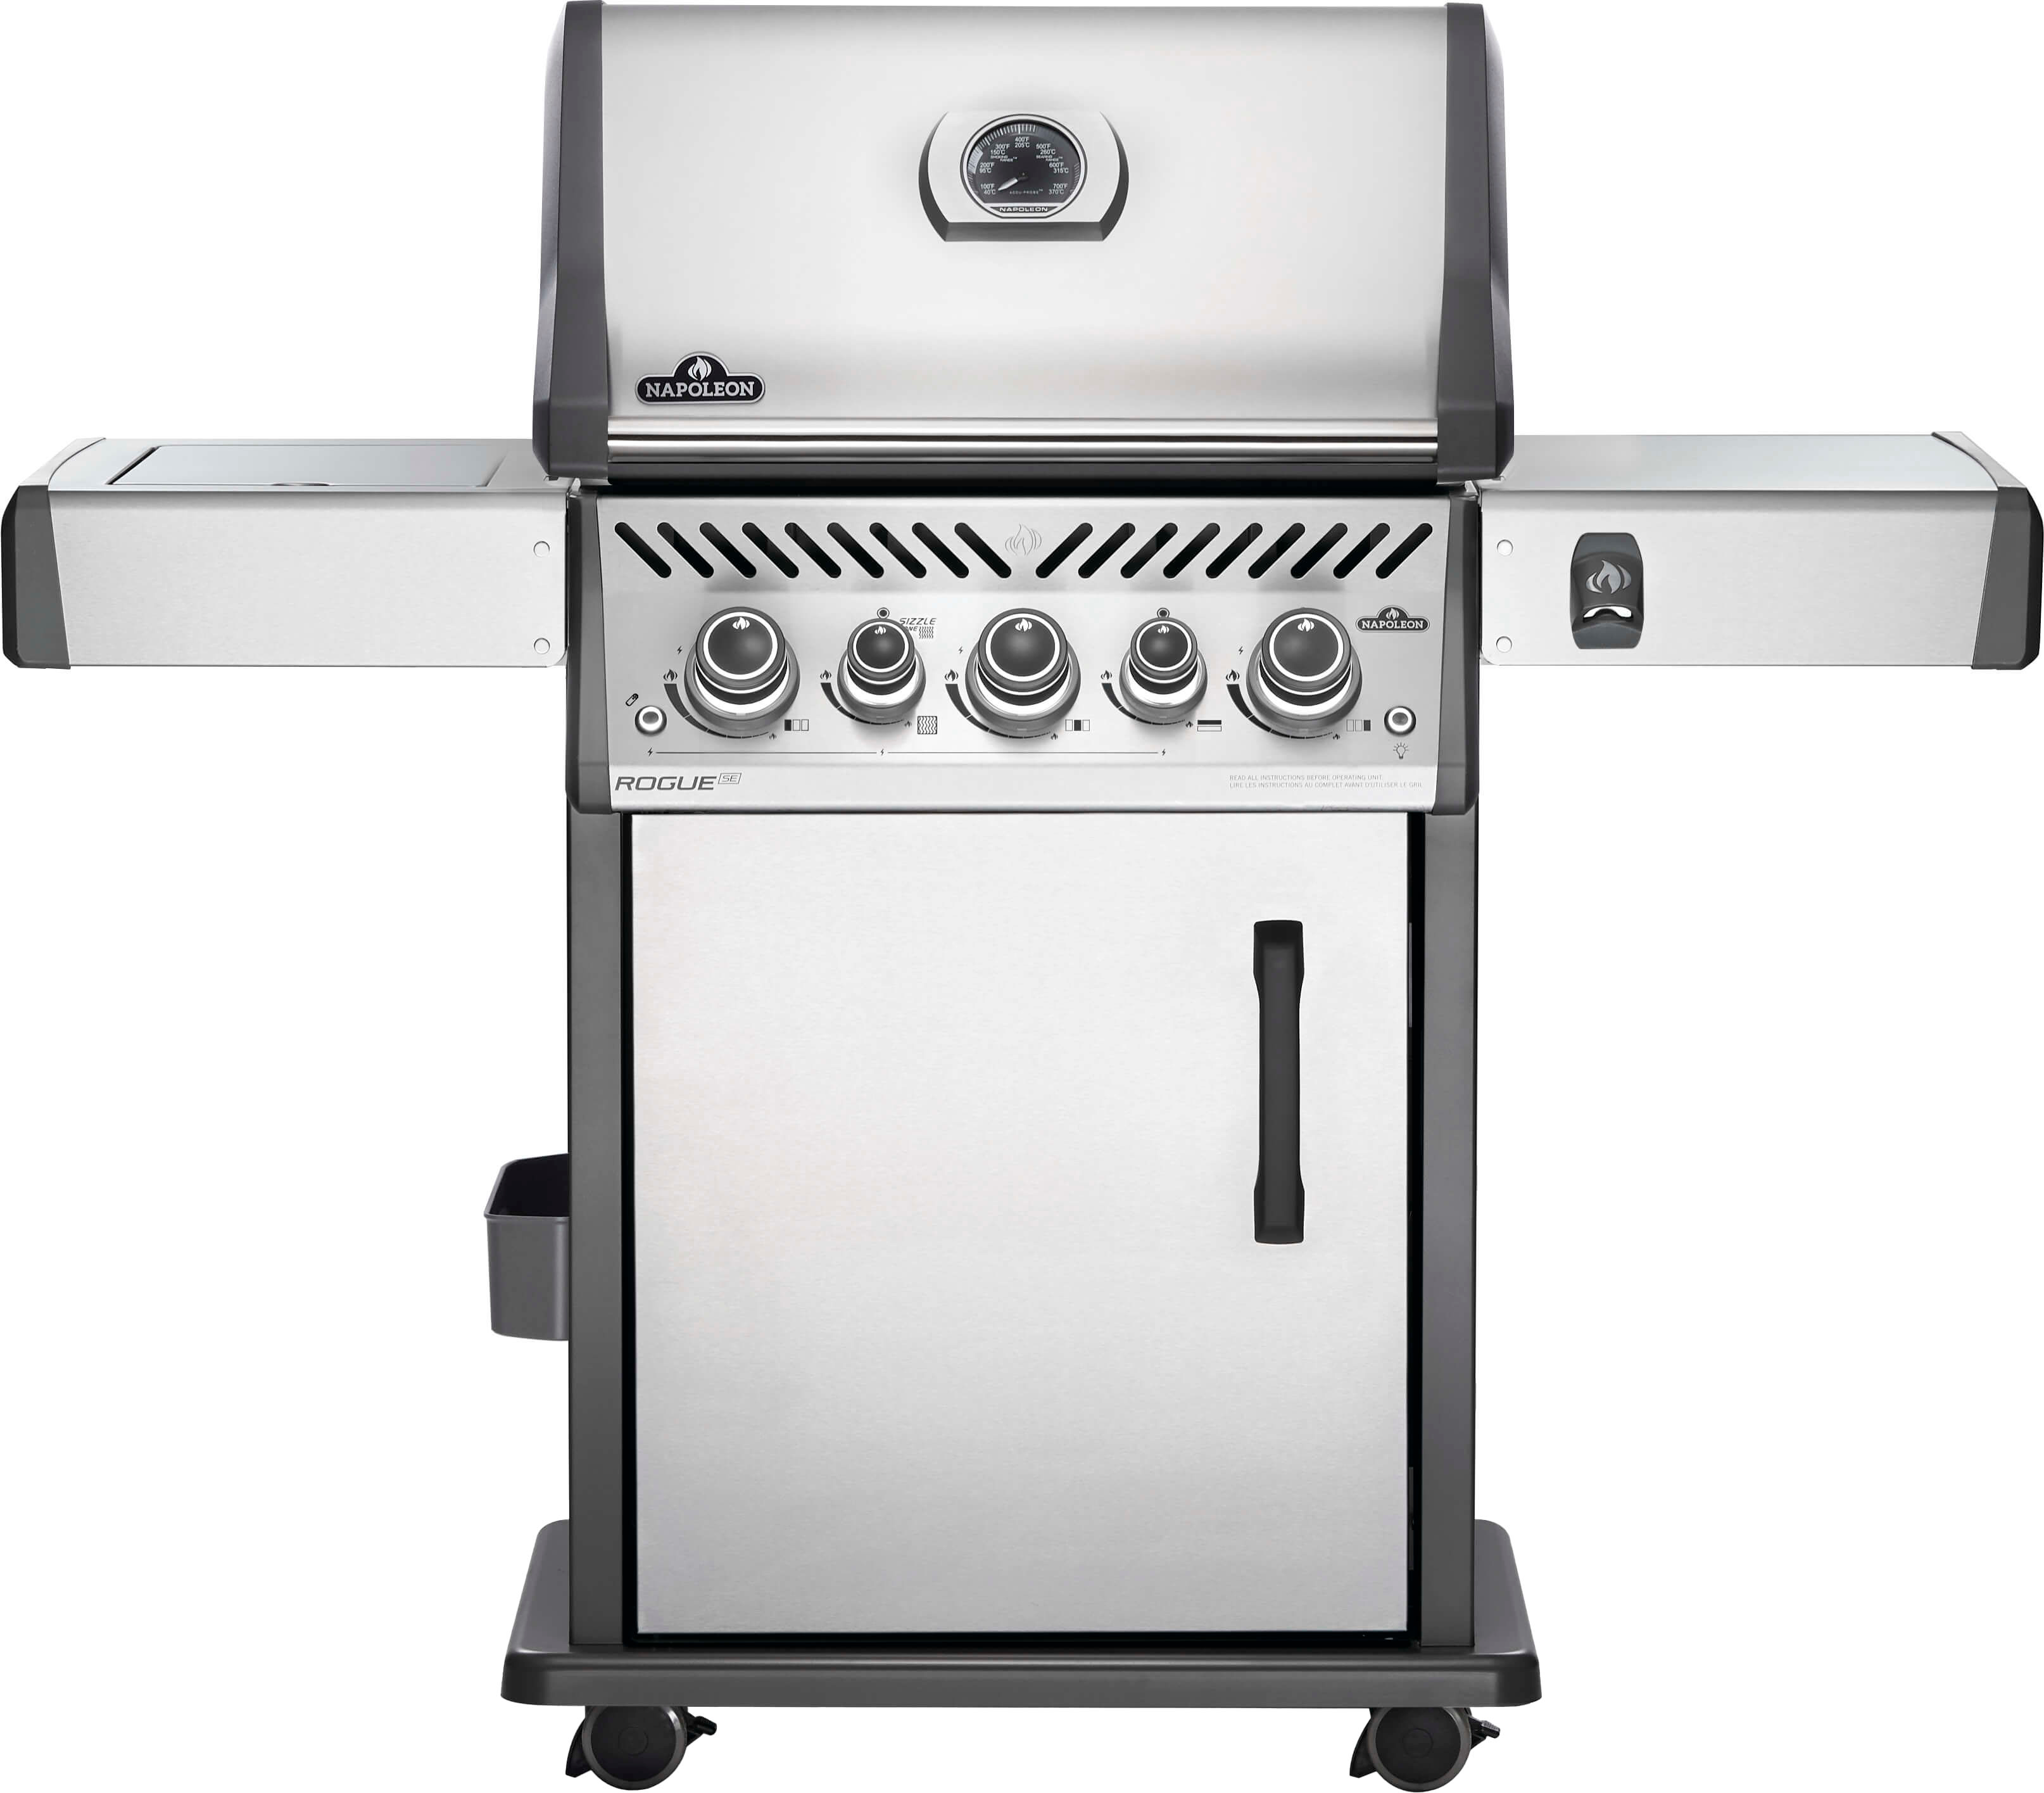 industri Vædde Forbyde Napoleon Rogue SE 425 Propane Gas Grill with Side and Rear Burners  Stainless Steel RSE425RSIBPSS-1 - Best Buy